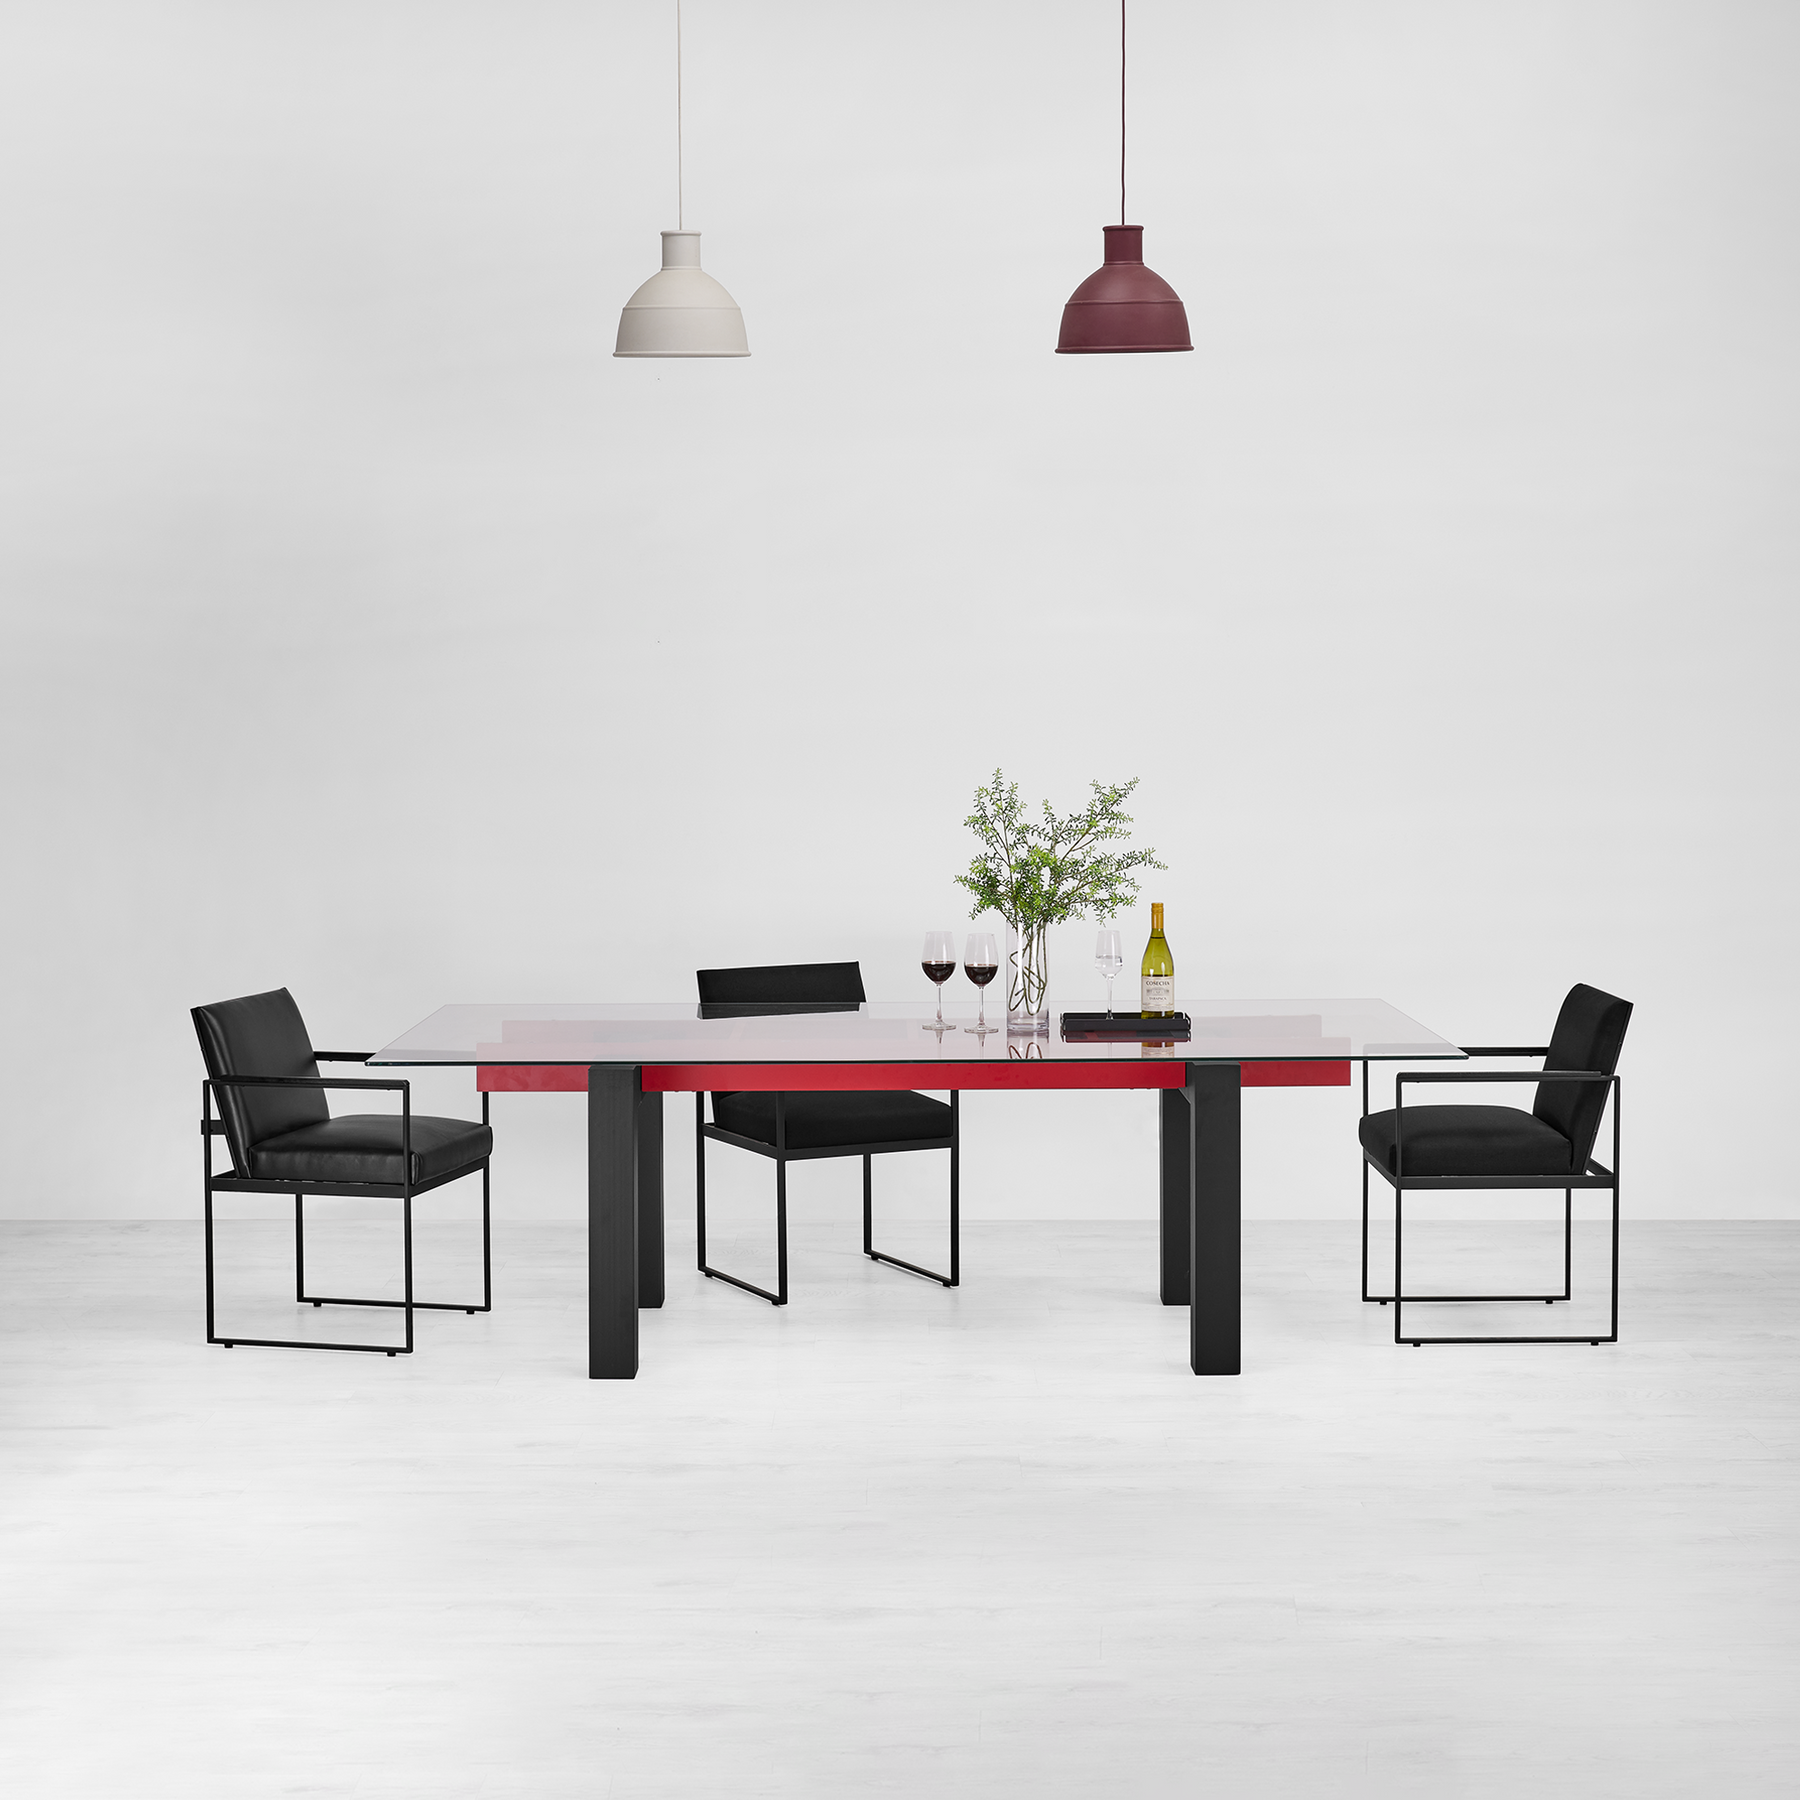 Beam Dining Table - 6 Seater